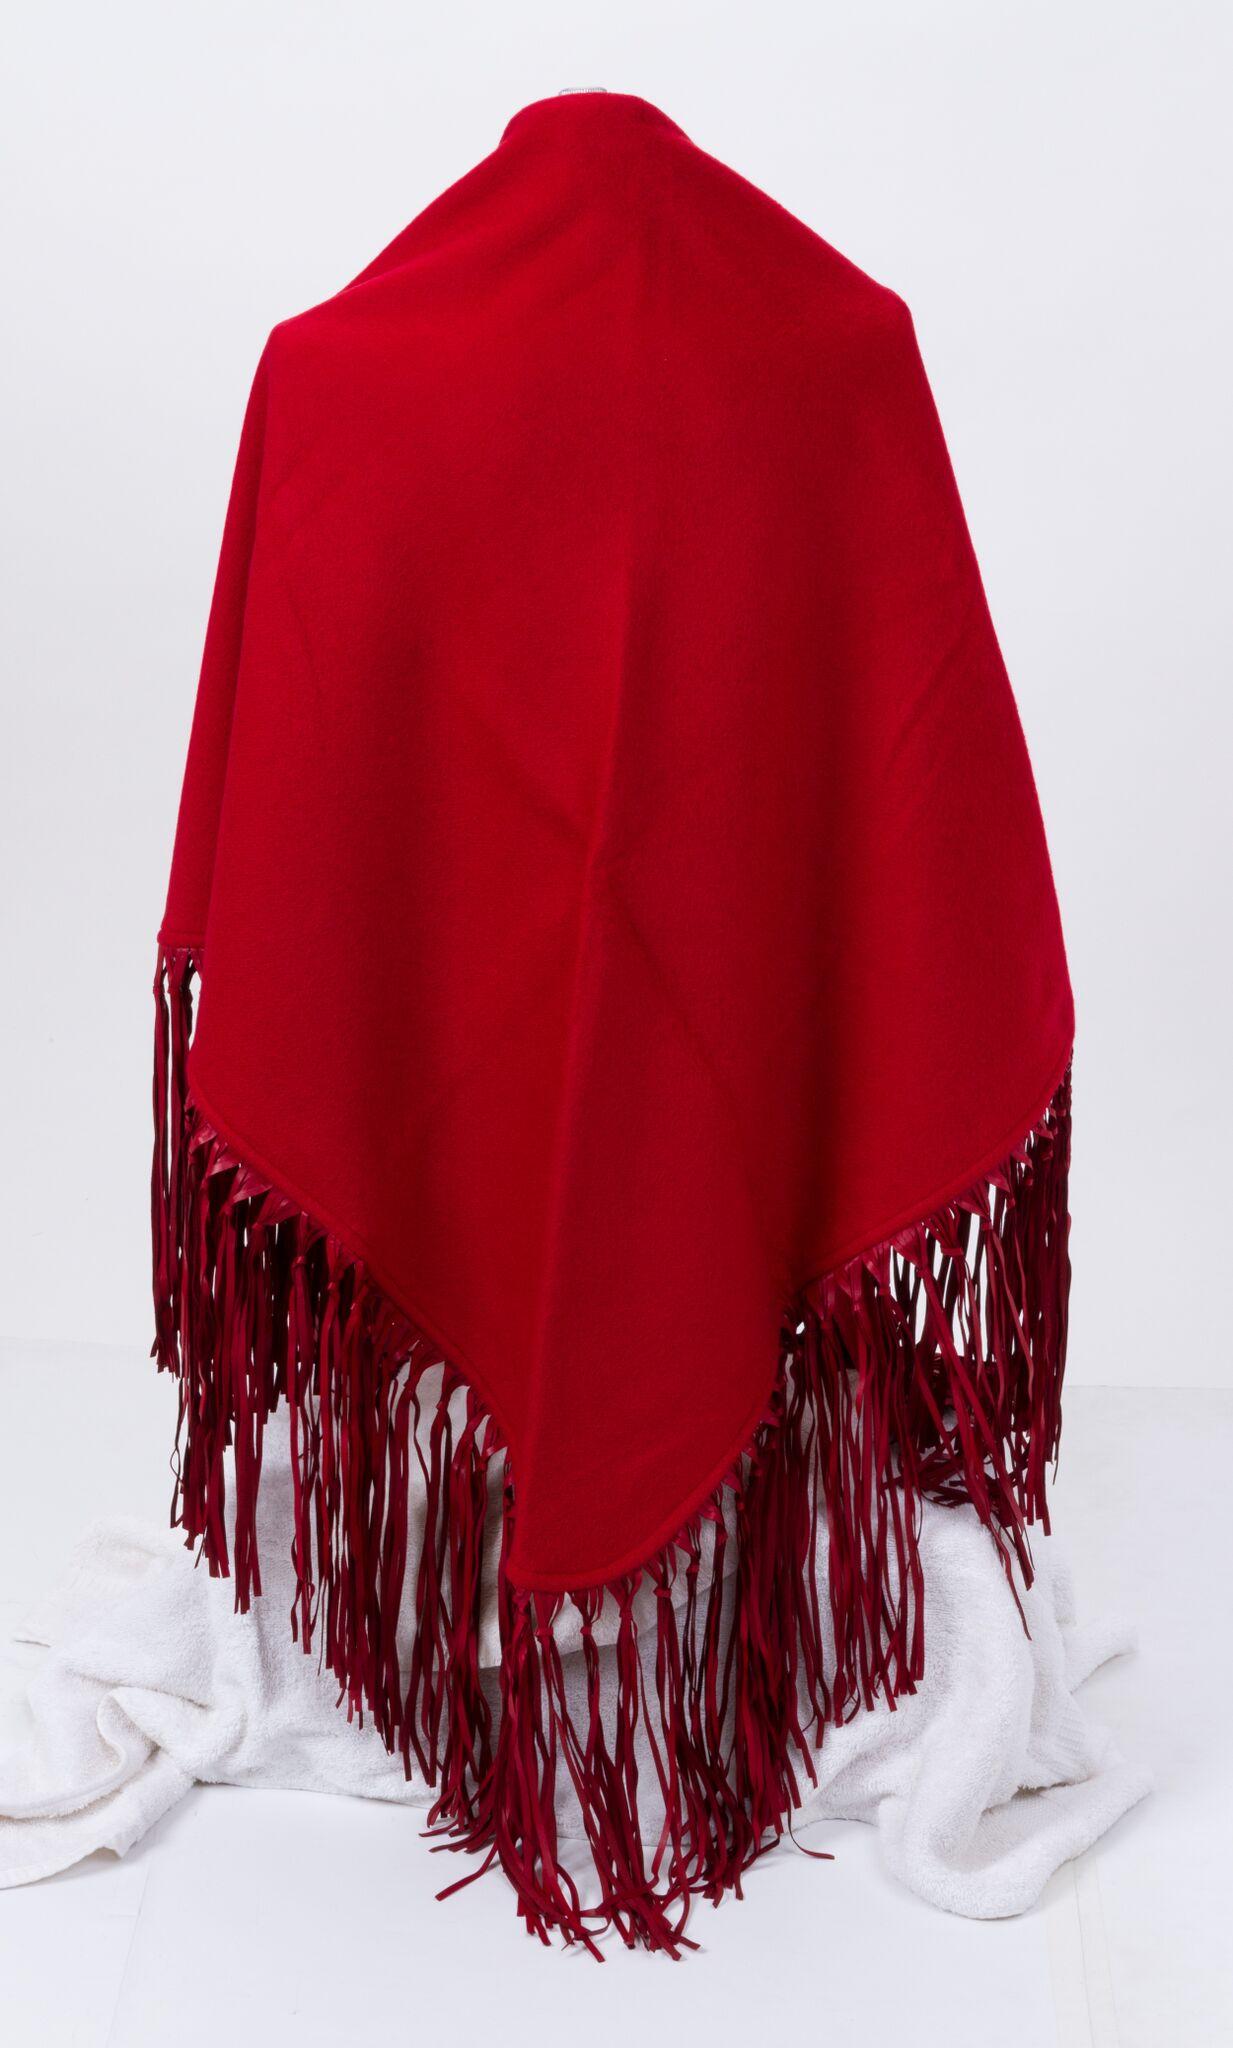 Late 1990s Hermès red cashmere-and-wool shawl with extra-long leather fringe. Brand new in original unworn condition.
70% cashmere/30% wool/leather